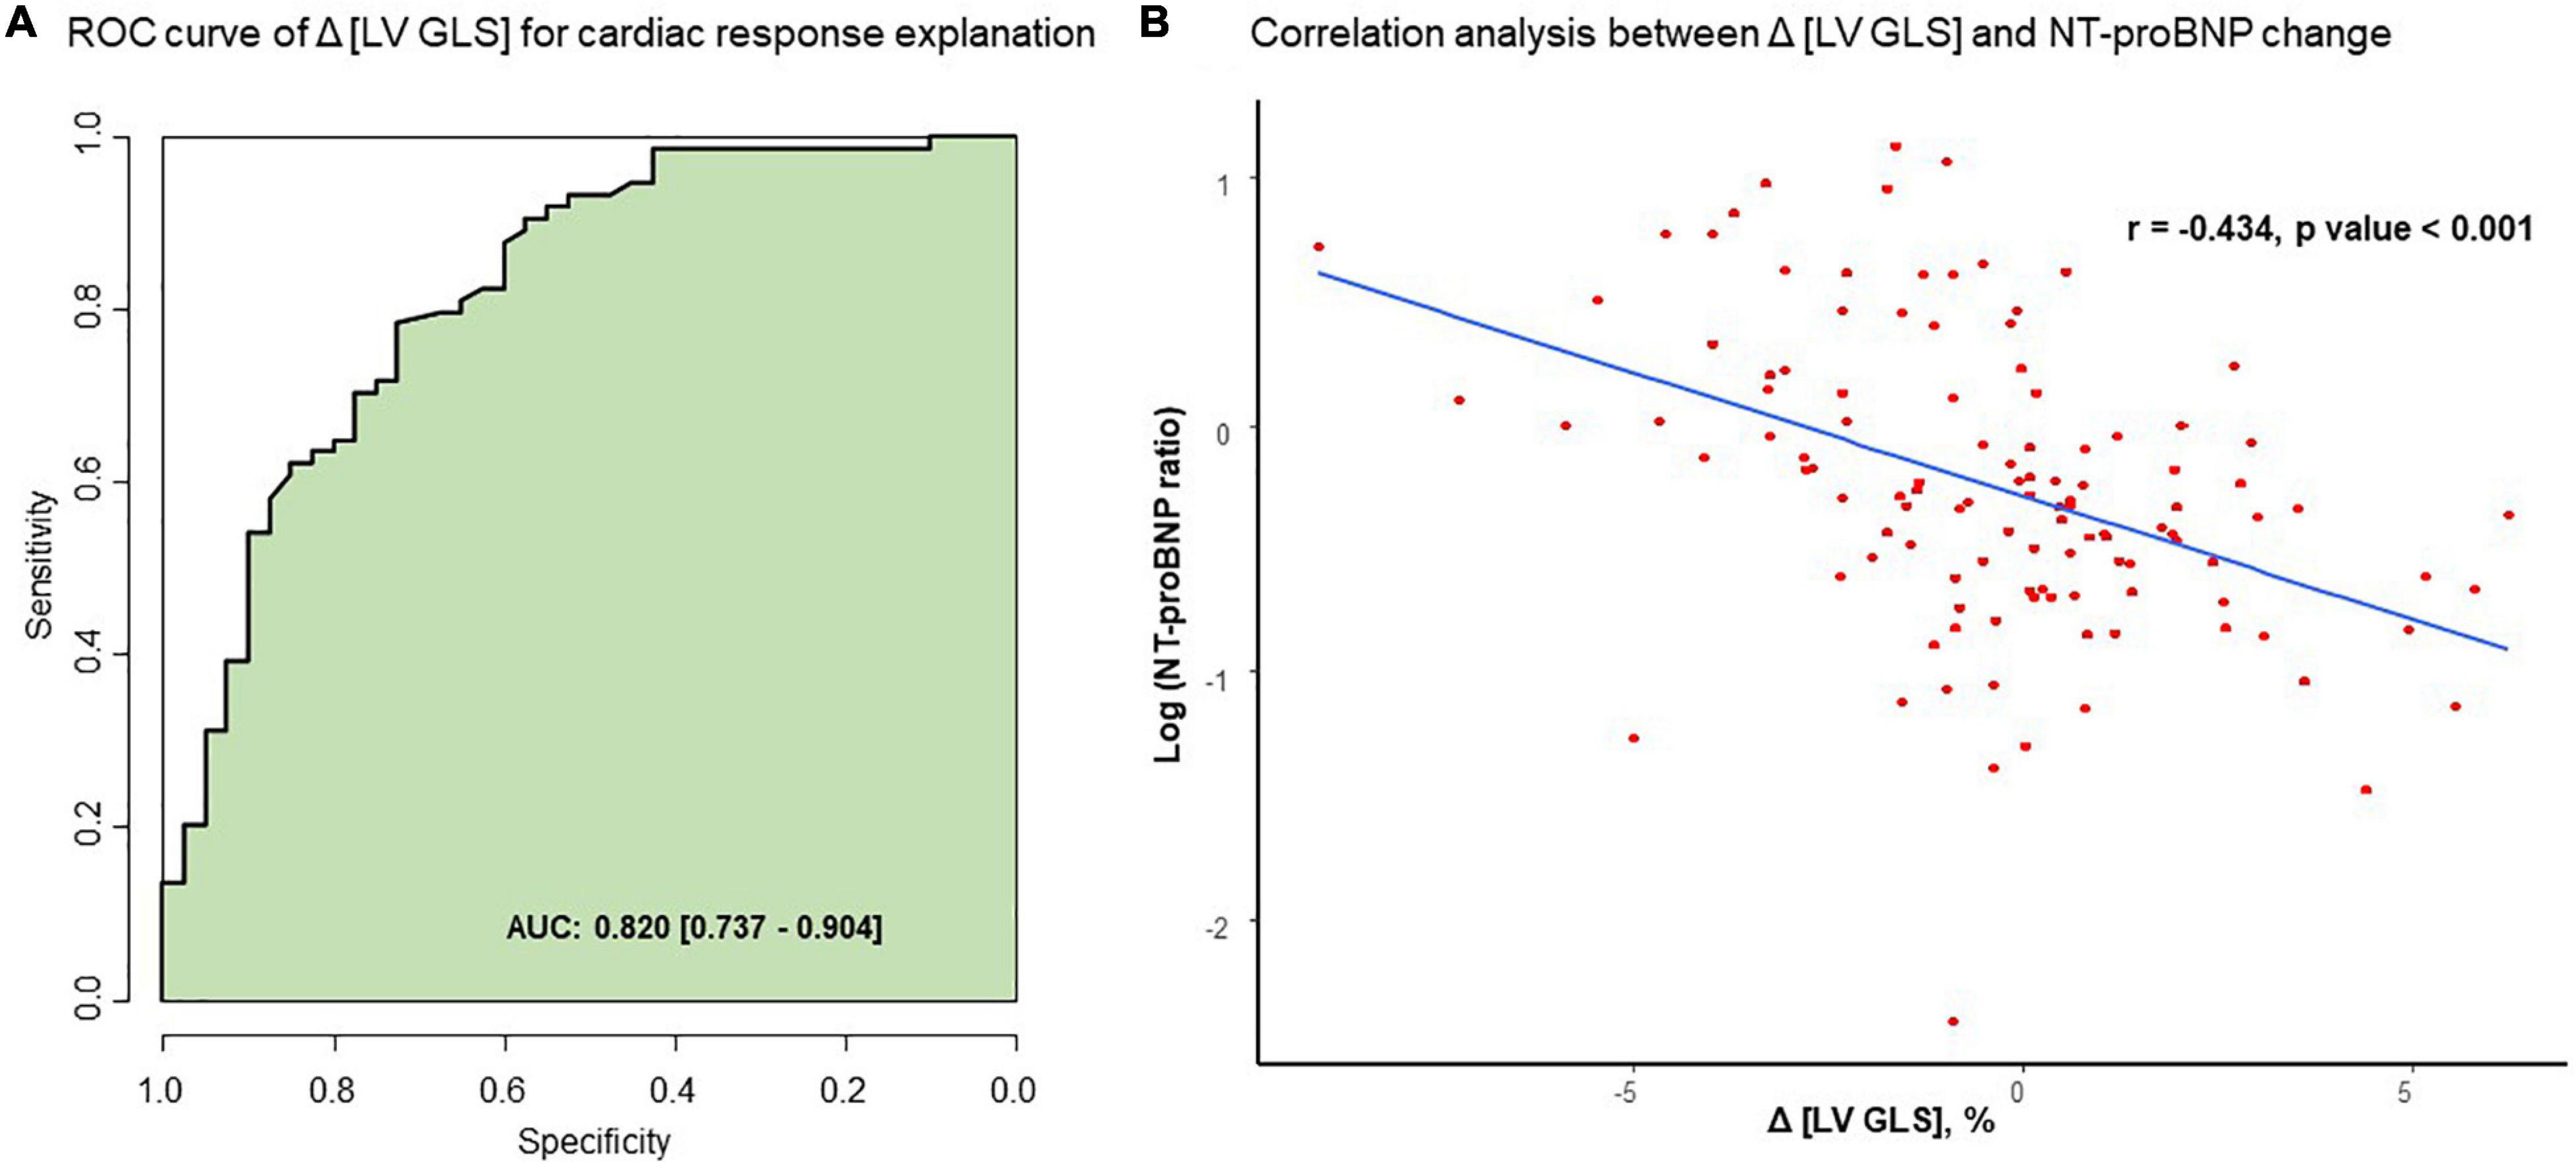 Relative Apical Sparing of Myocardial Longitudinal Strain Is Explained by  Regional Differences in Total Amyloid Mass Rather Than the Proportion of  Amyloid Deposits